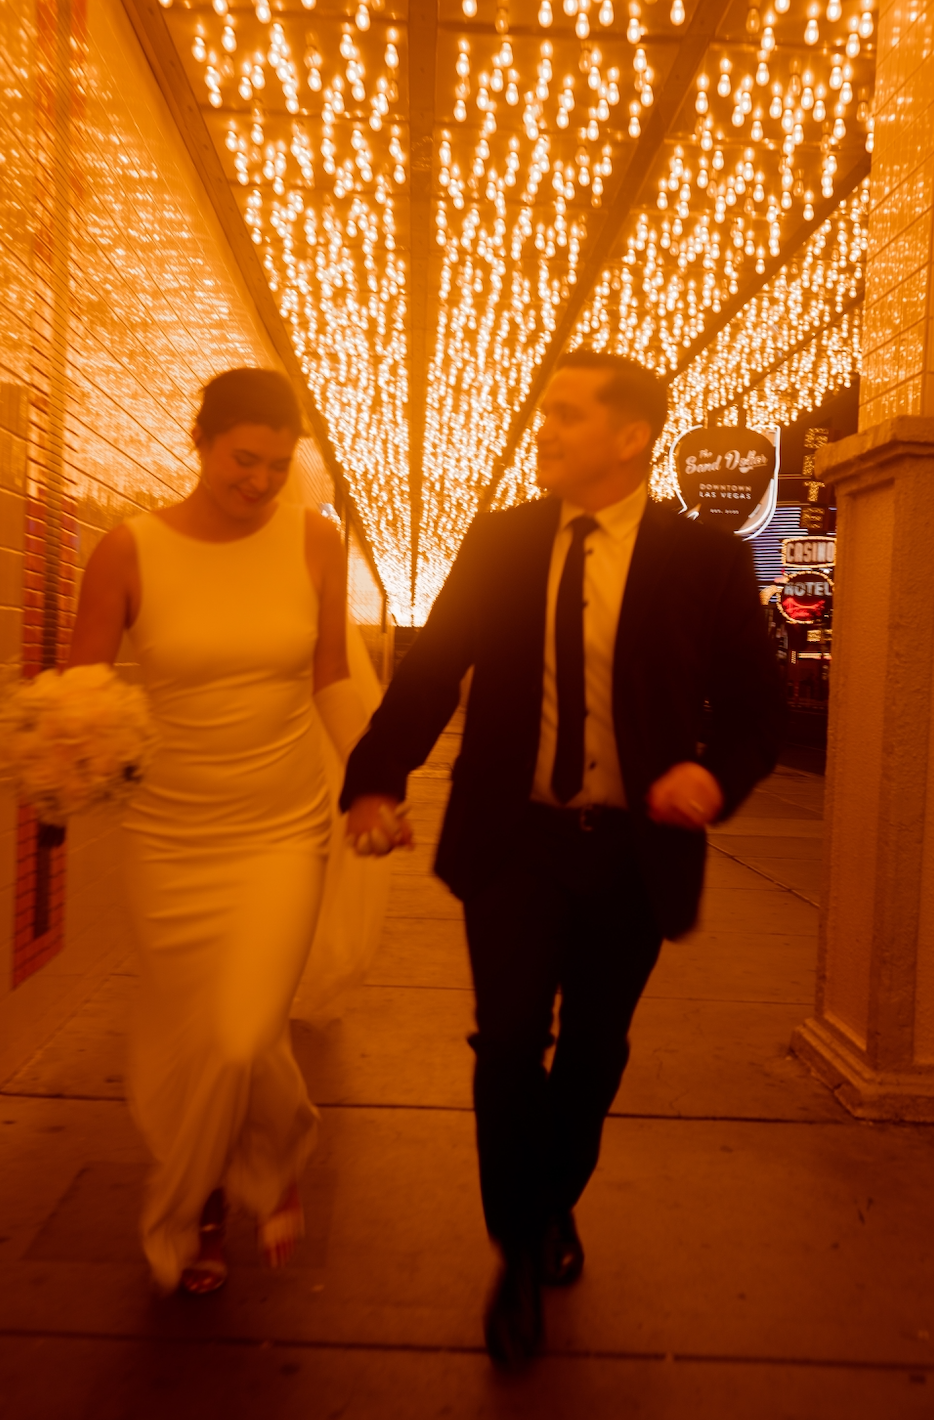 Newly weds running through downtown Las Vegas, wearing a white bridal gown with alterations and the groom wearing a tailored black suit. Xoxo bridal, david's bridal, bowties, celebrations.